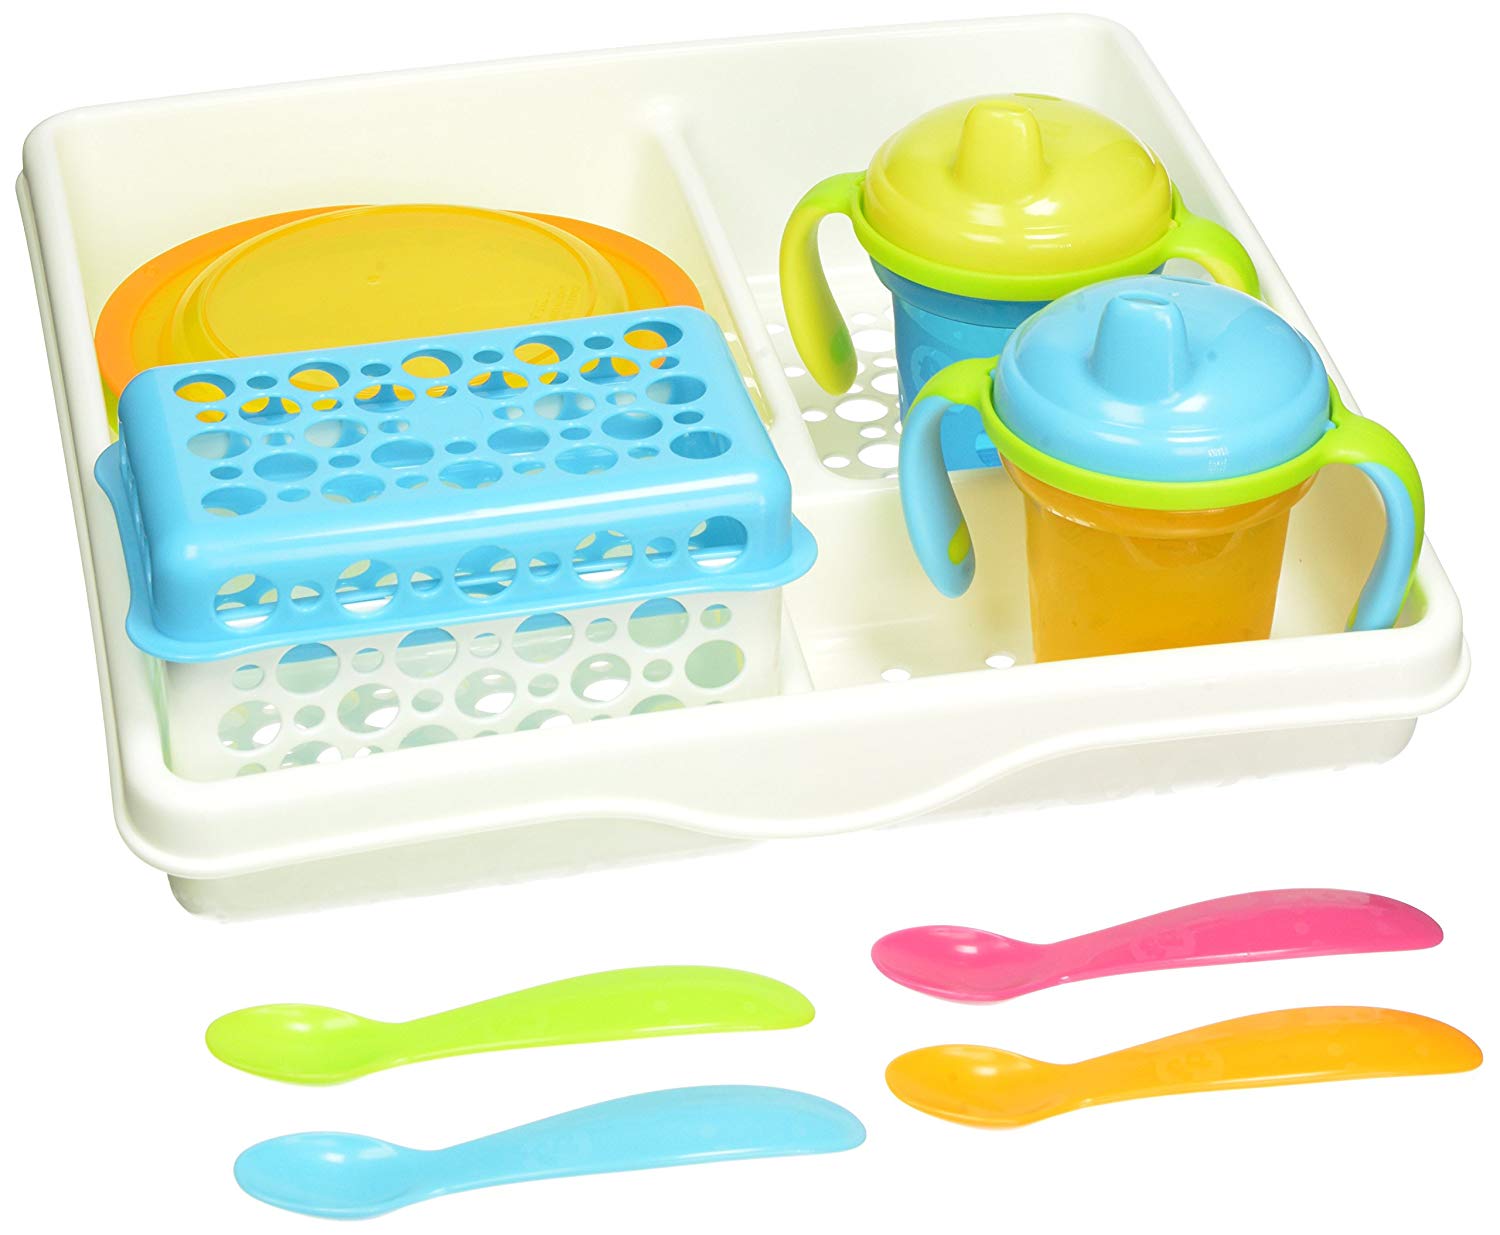 Fisher Price – Wash N Store Lunch Kit Gift Set (Y3517)